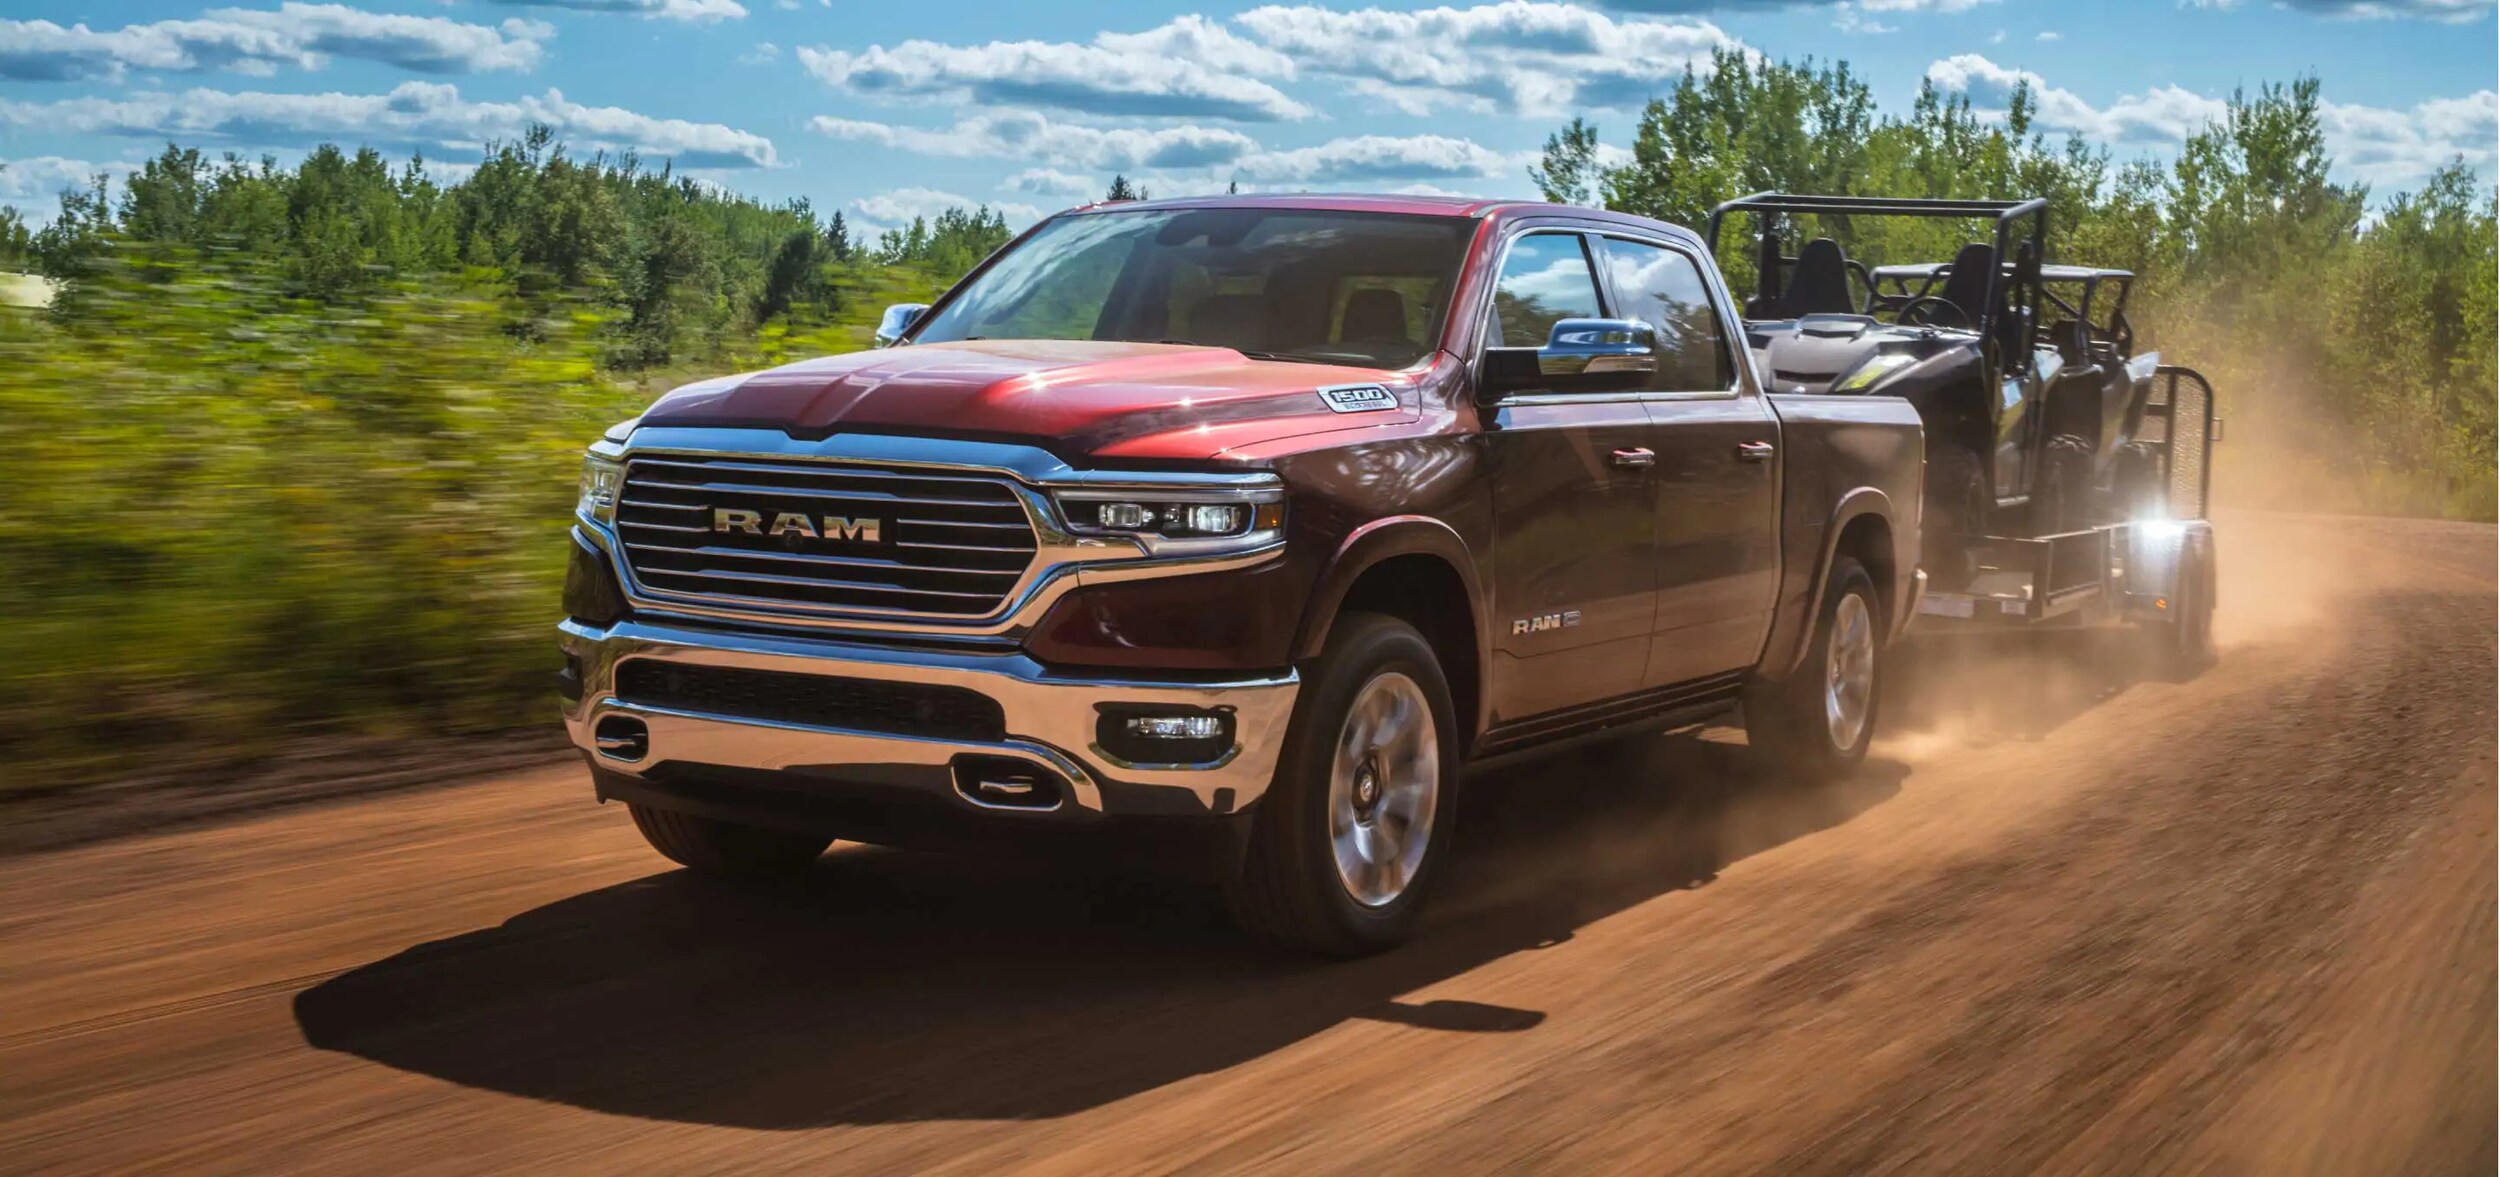 2021 Ram 1500 EcoDiesel for Sale in Paso Robles Mullahey Chrysler